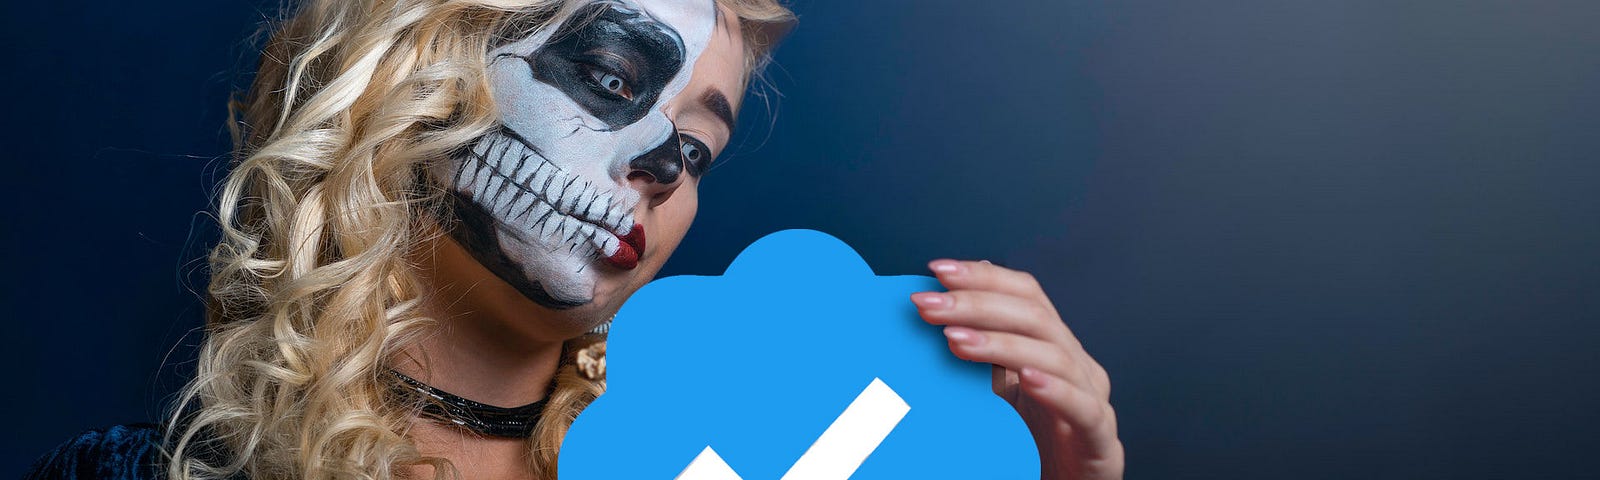 Woman in skeleton face paint holding Twitter verified icon.